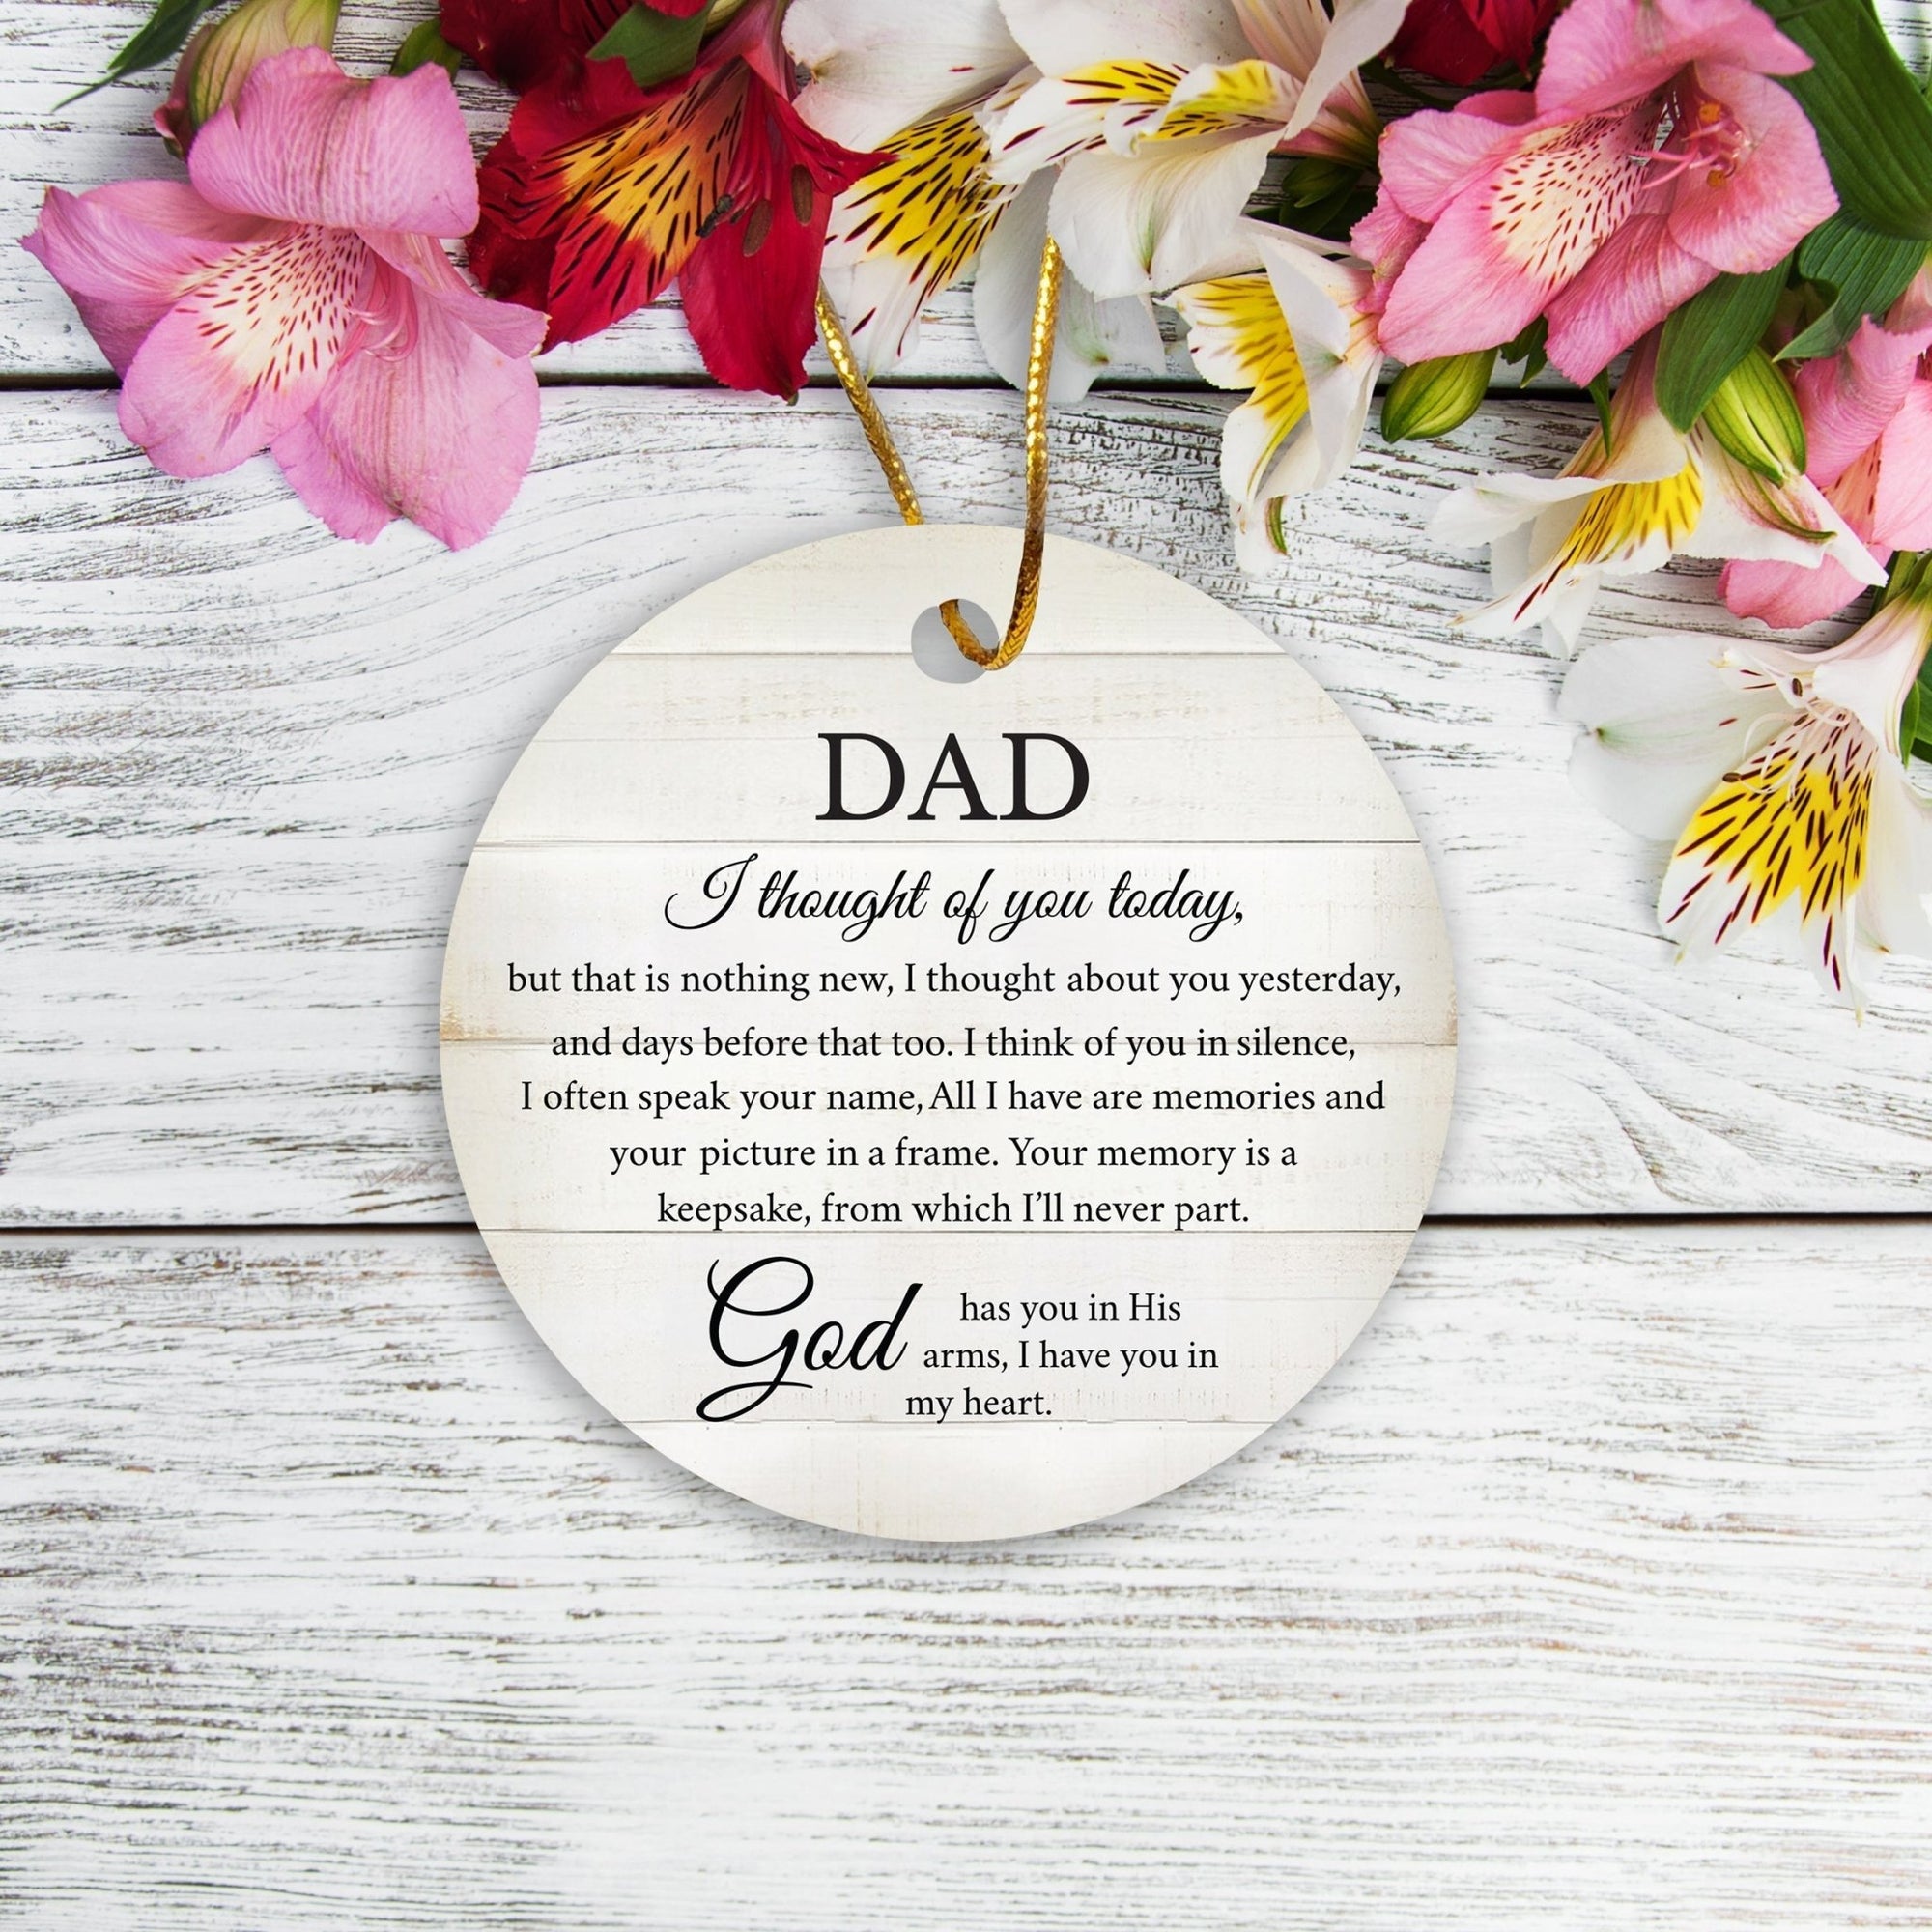 Hanging Memorial Ceramic Ornament for Loss of Loved One - I Thought Of You - LifeSong Milestones